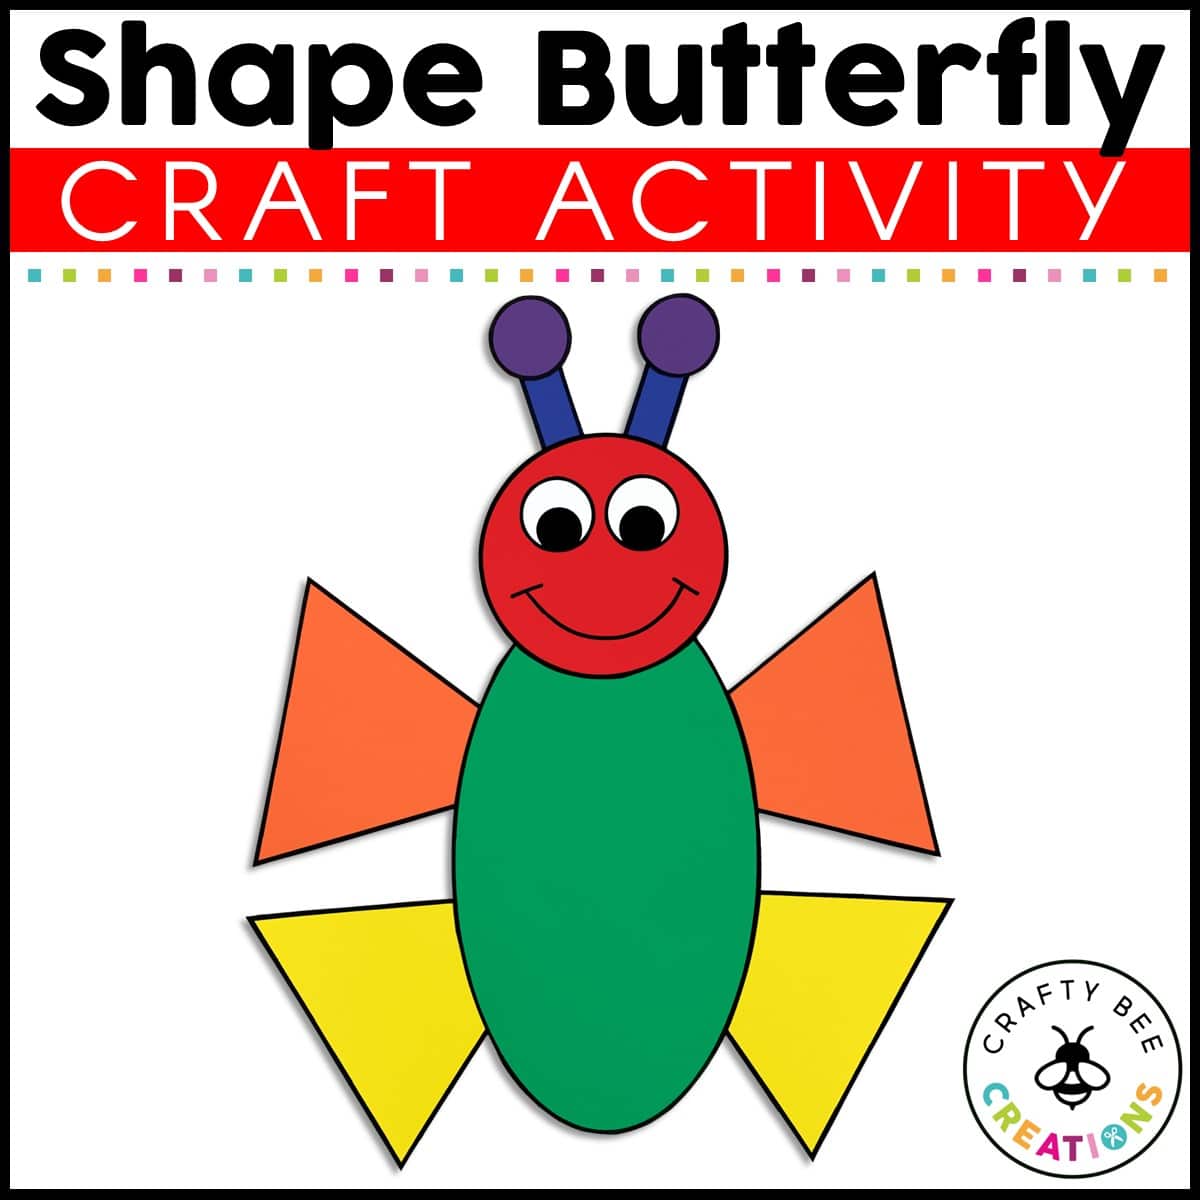 shape-butterfly-craft-activity-crafty-bee-creations